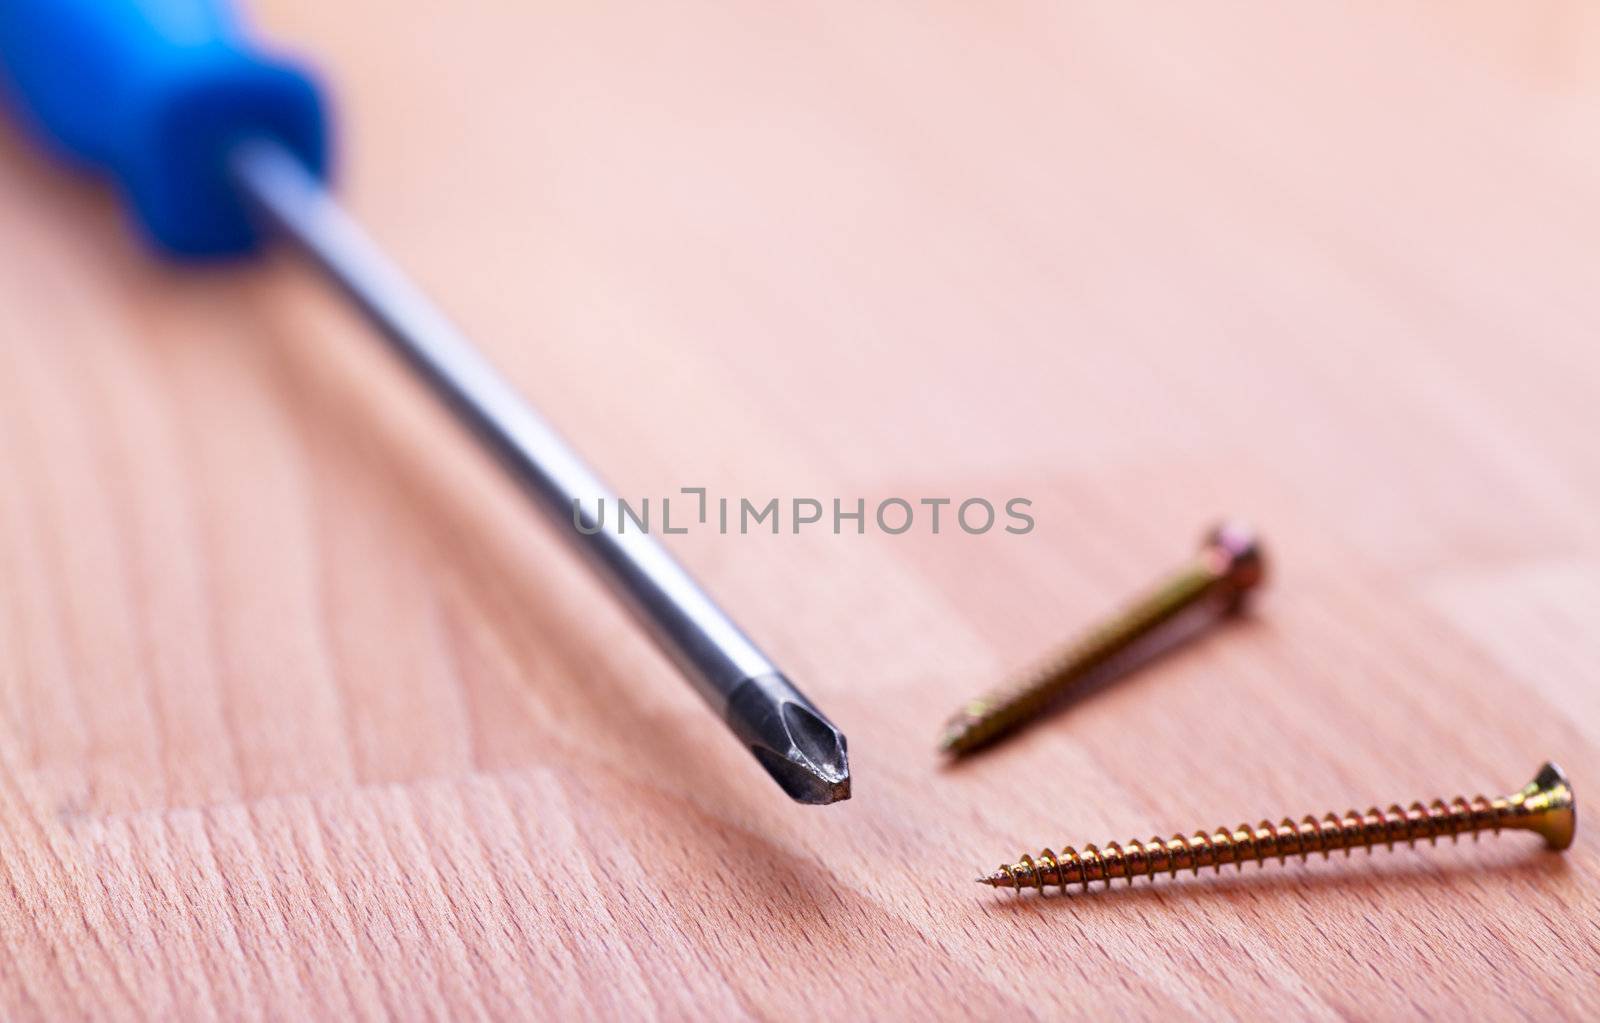 Closeup view of screwdriver over wood background